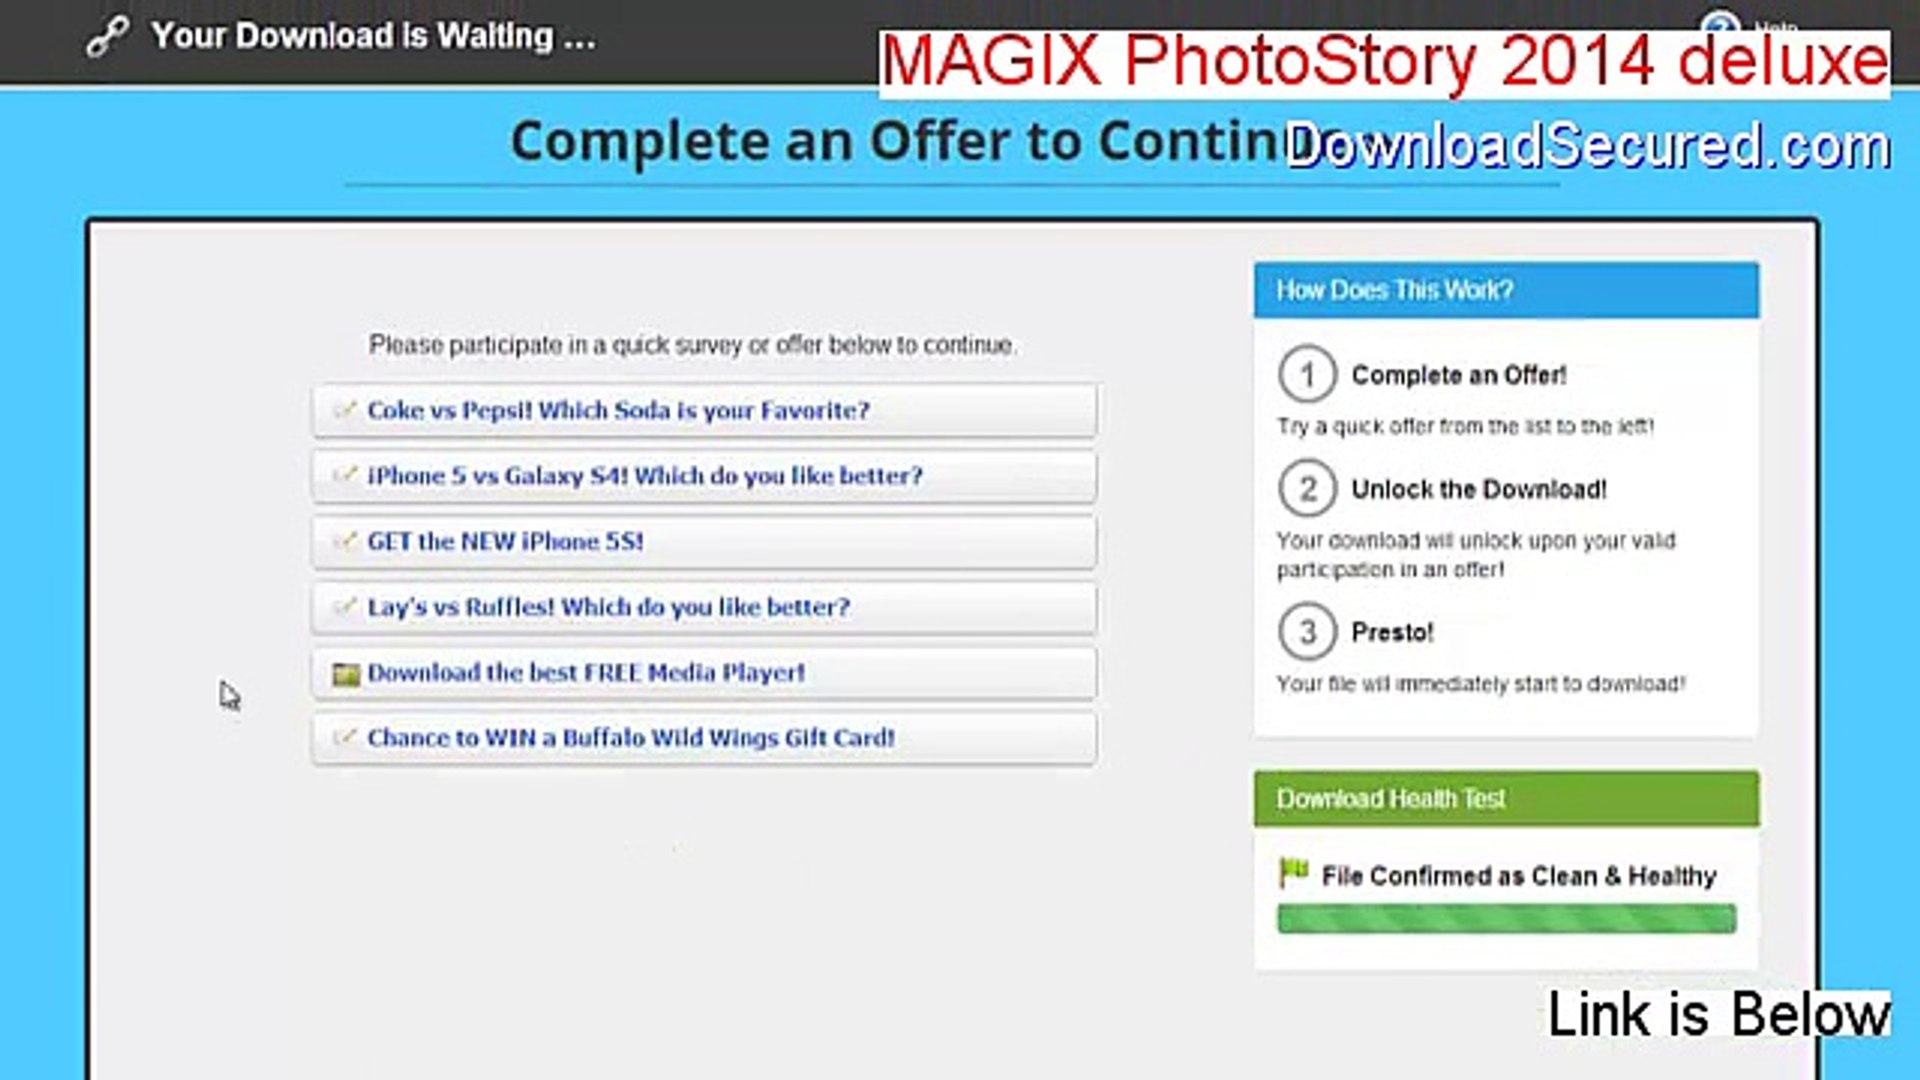 MAGIX PhotoStory 2014 deluxe Key Gen - magix photostory 2014 deluxe serial  - video Dailymotion